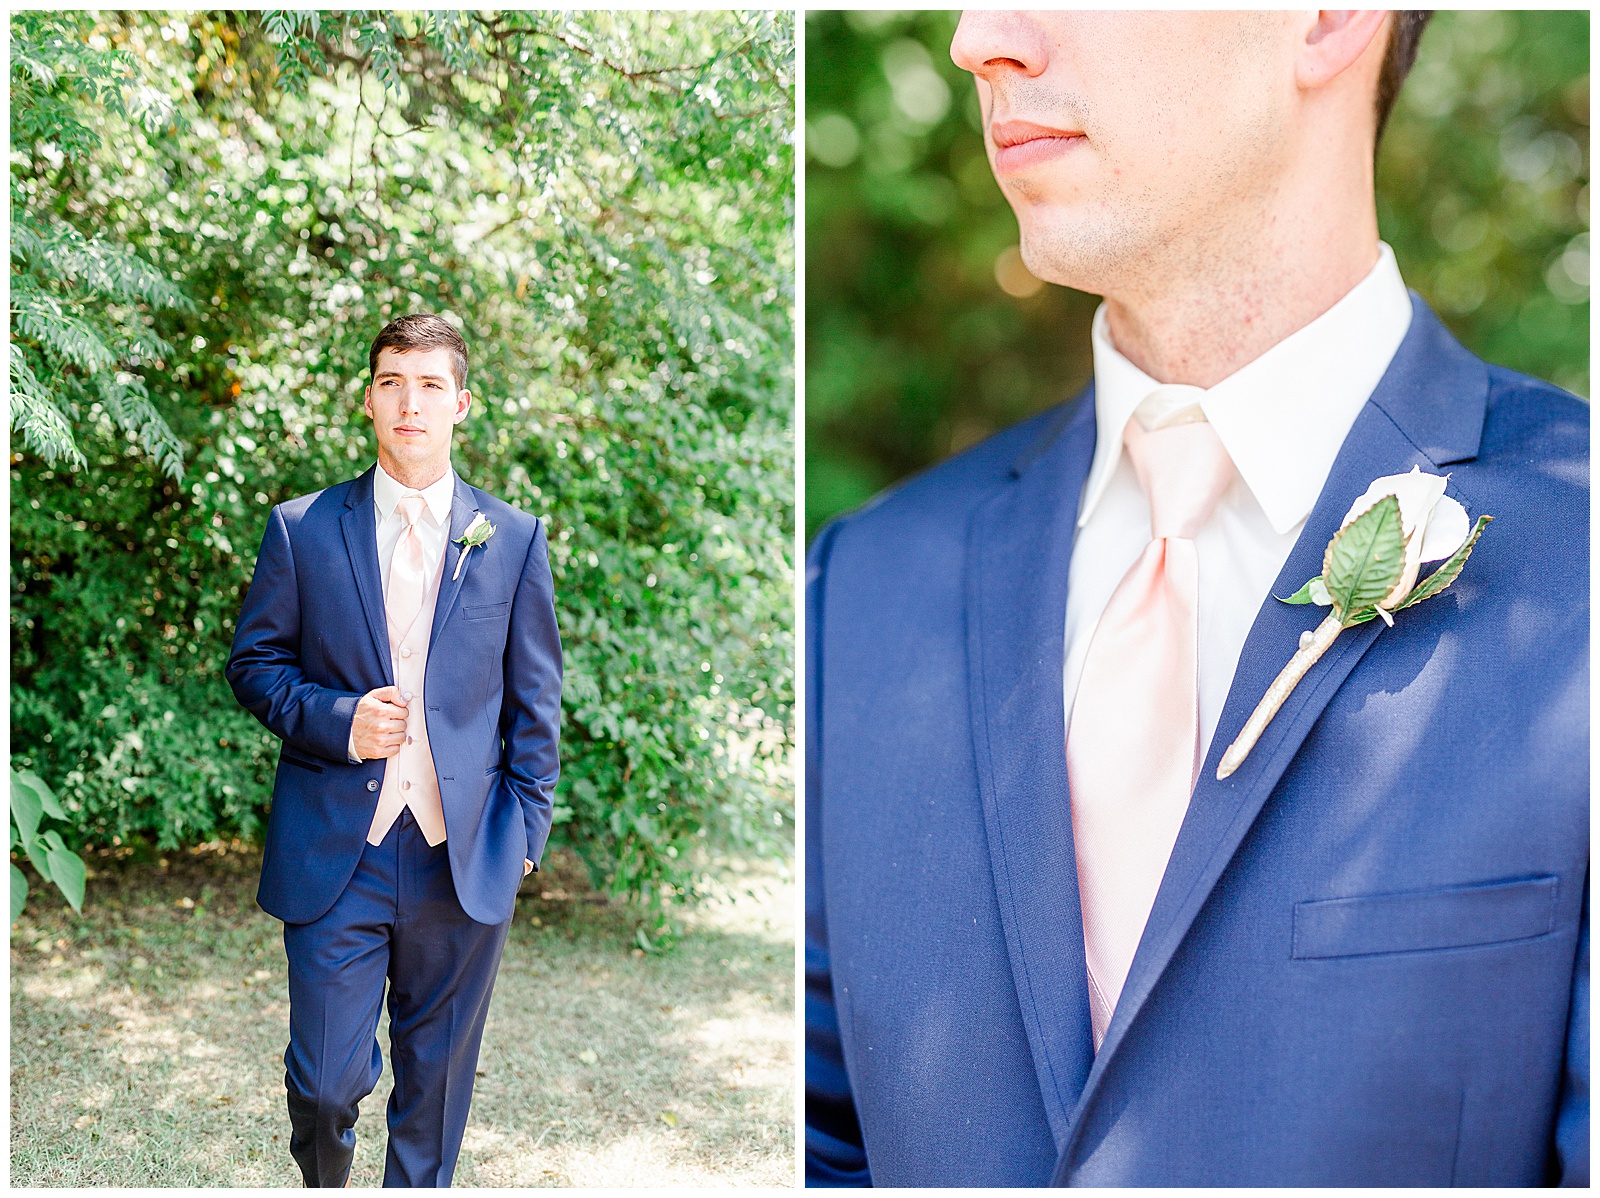 Groom Photo in Blue Suit from Summer Wedding in Charlotte, NC | Check out the full wedding at KevynDixonPhoto.com